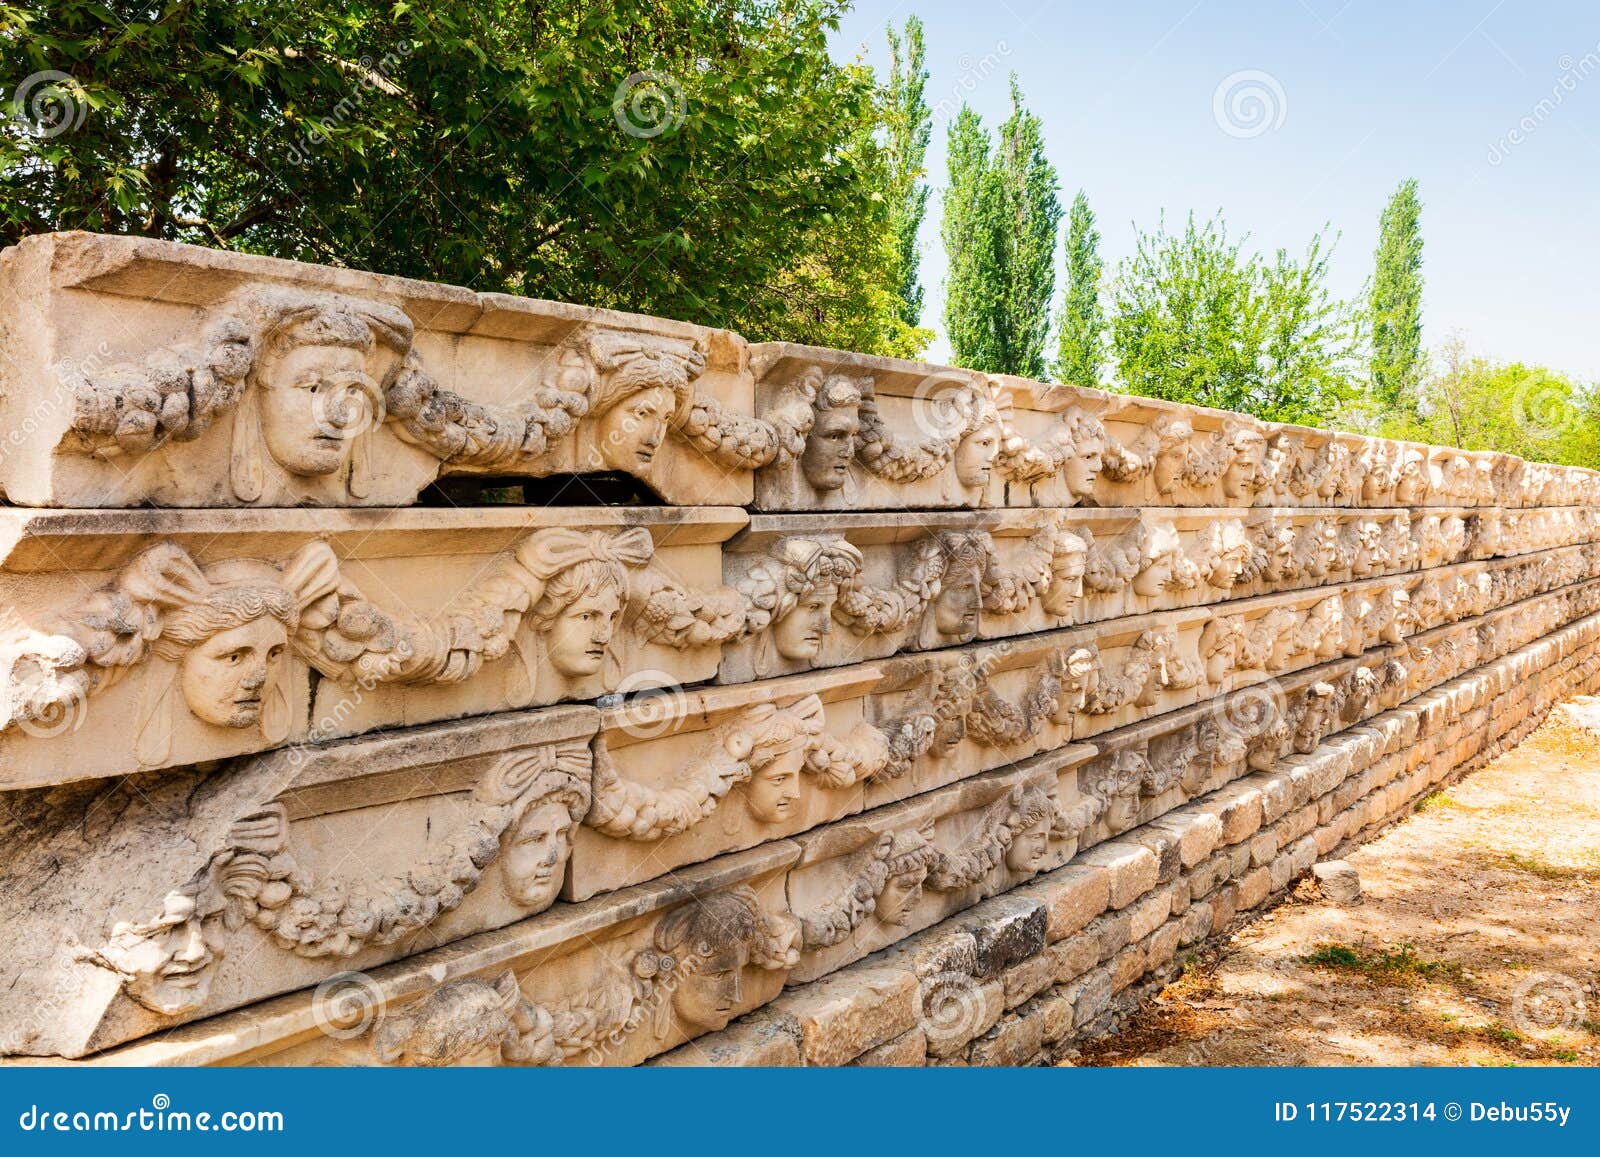 archaeological site of helenistic city of aphrodisias in western anatolia, turkey.